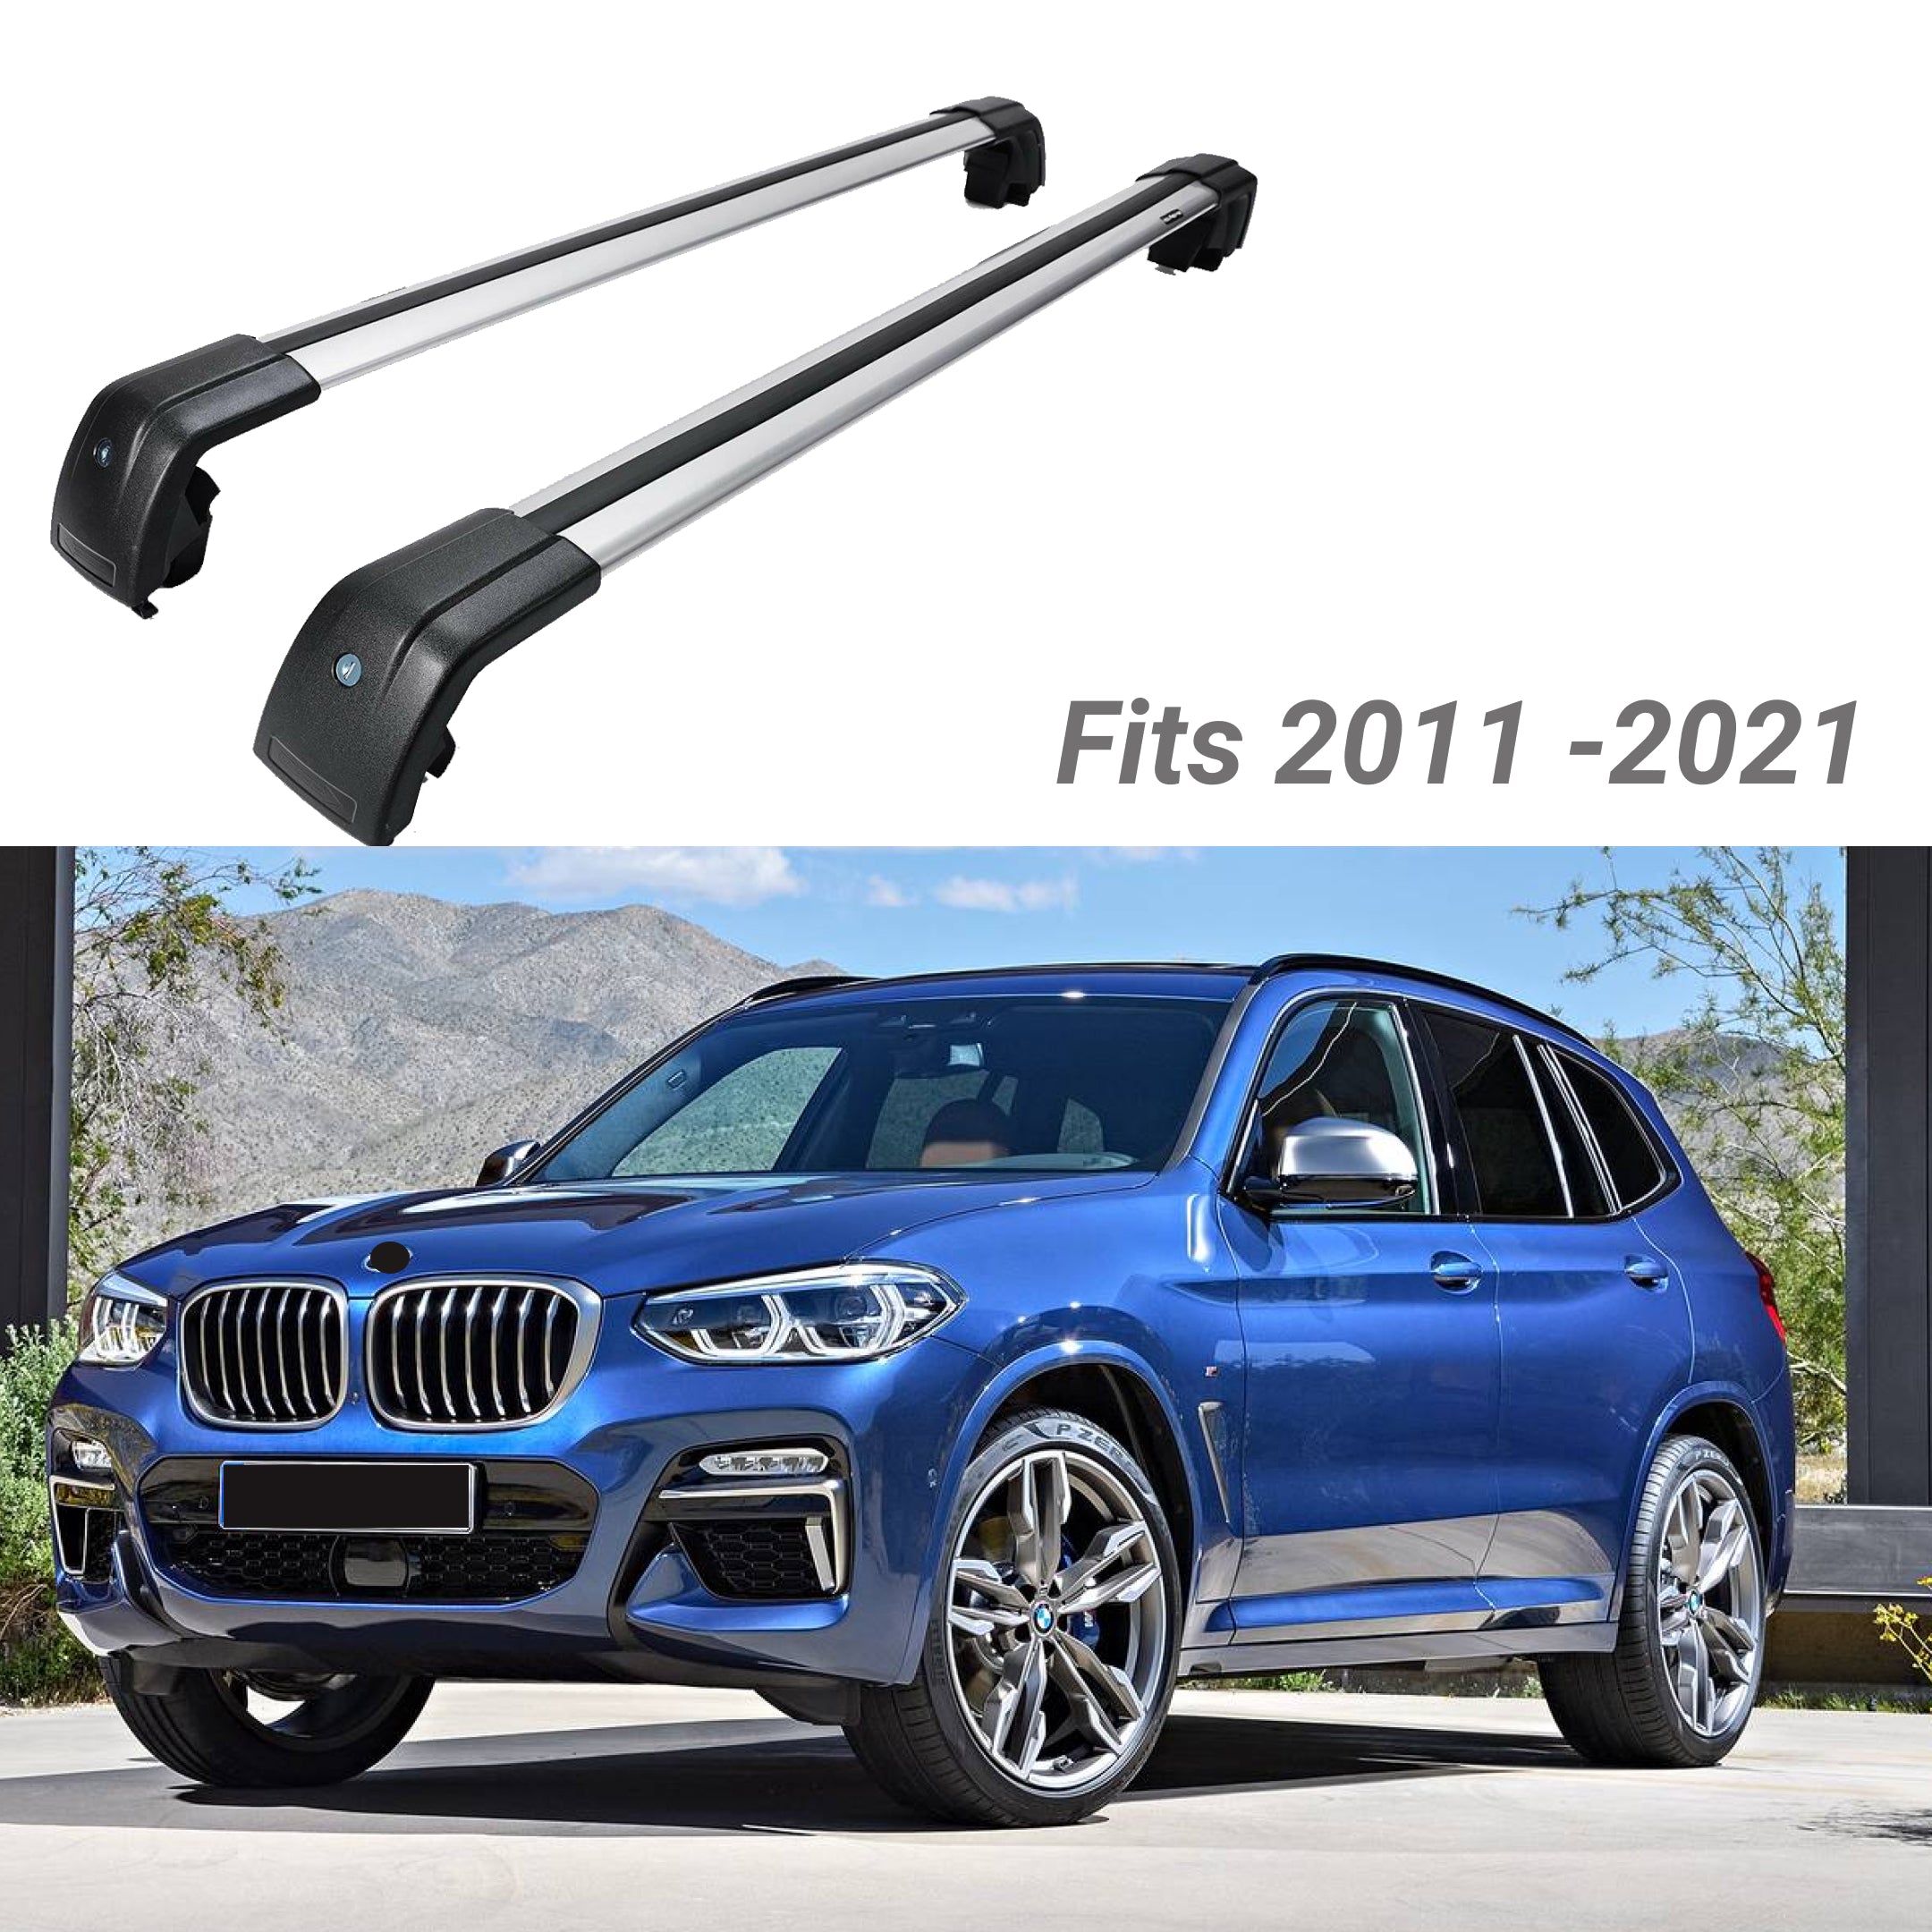 Fit 2011-2021 BMW X3 SUV Top Roof Rack Cross Bar Baggage Luggage Carrier Bar